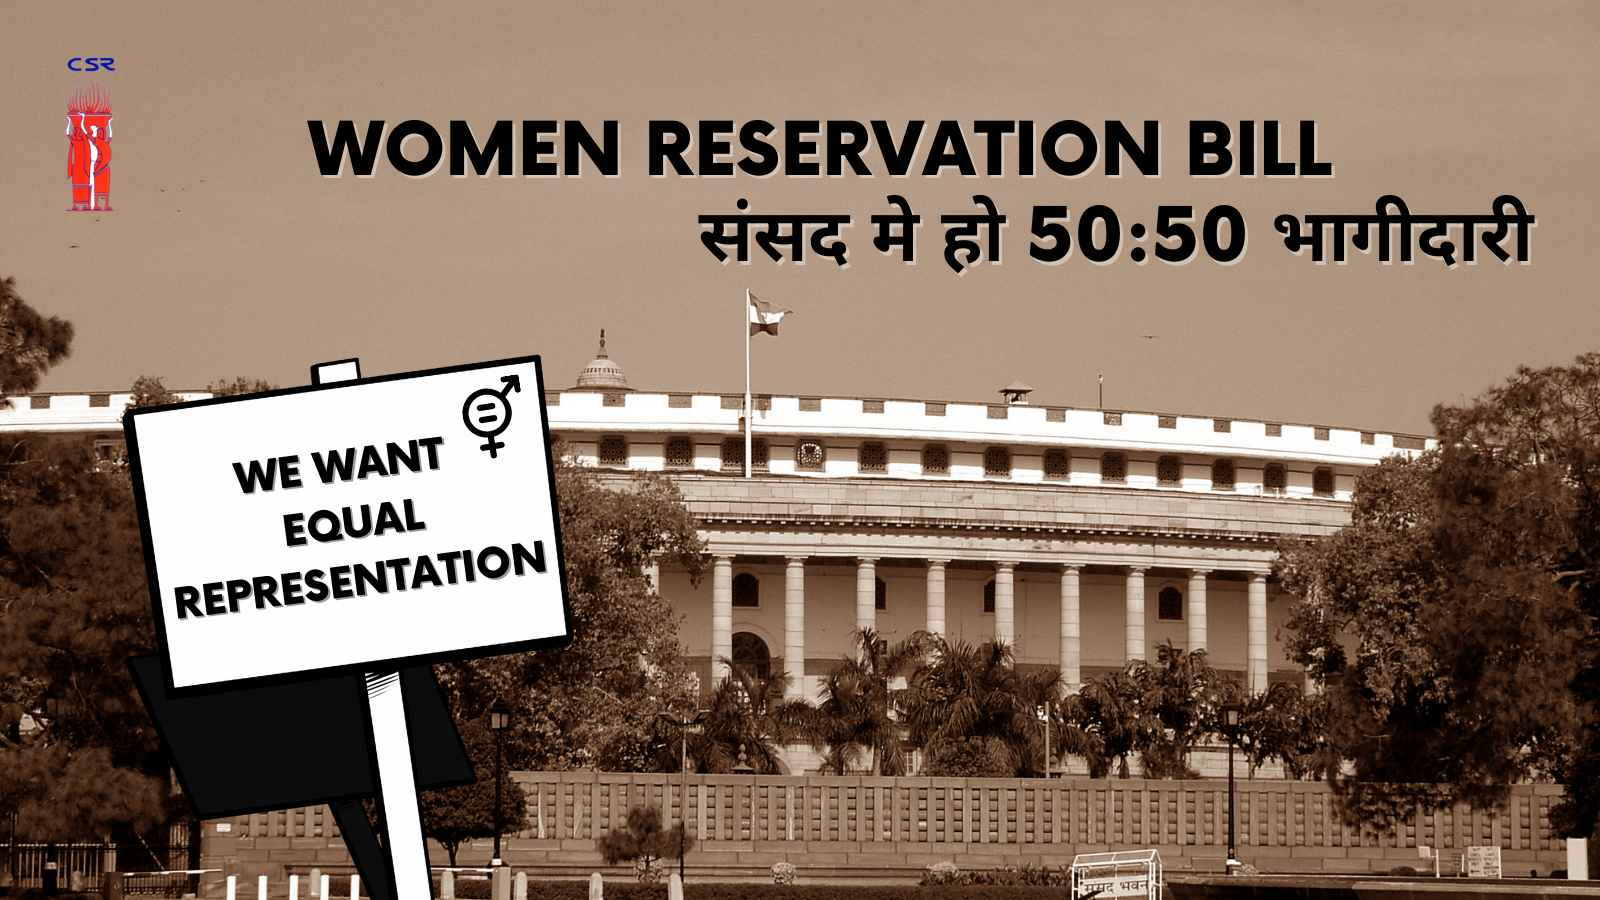 Advocacy Argument for the Women’s Reservation Bill: